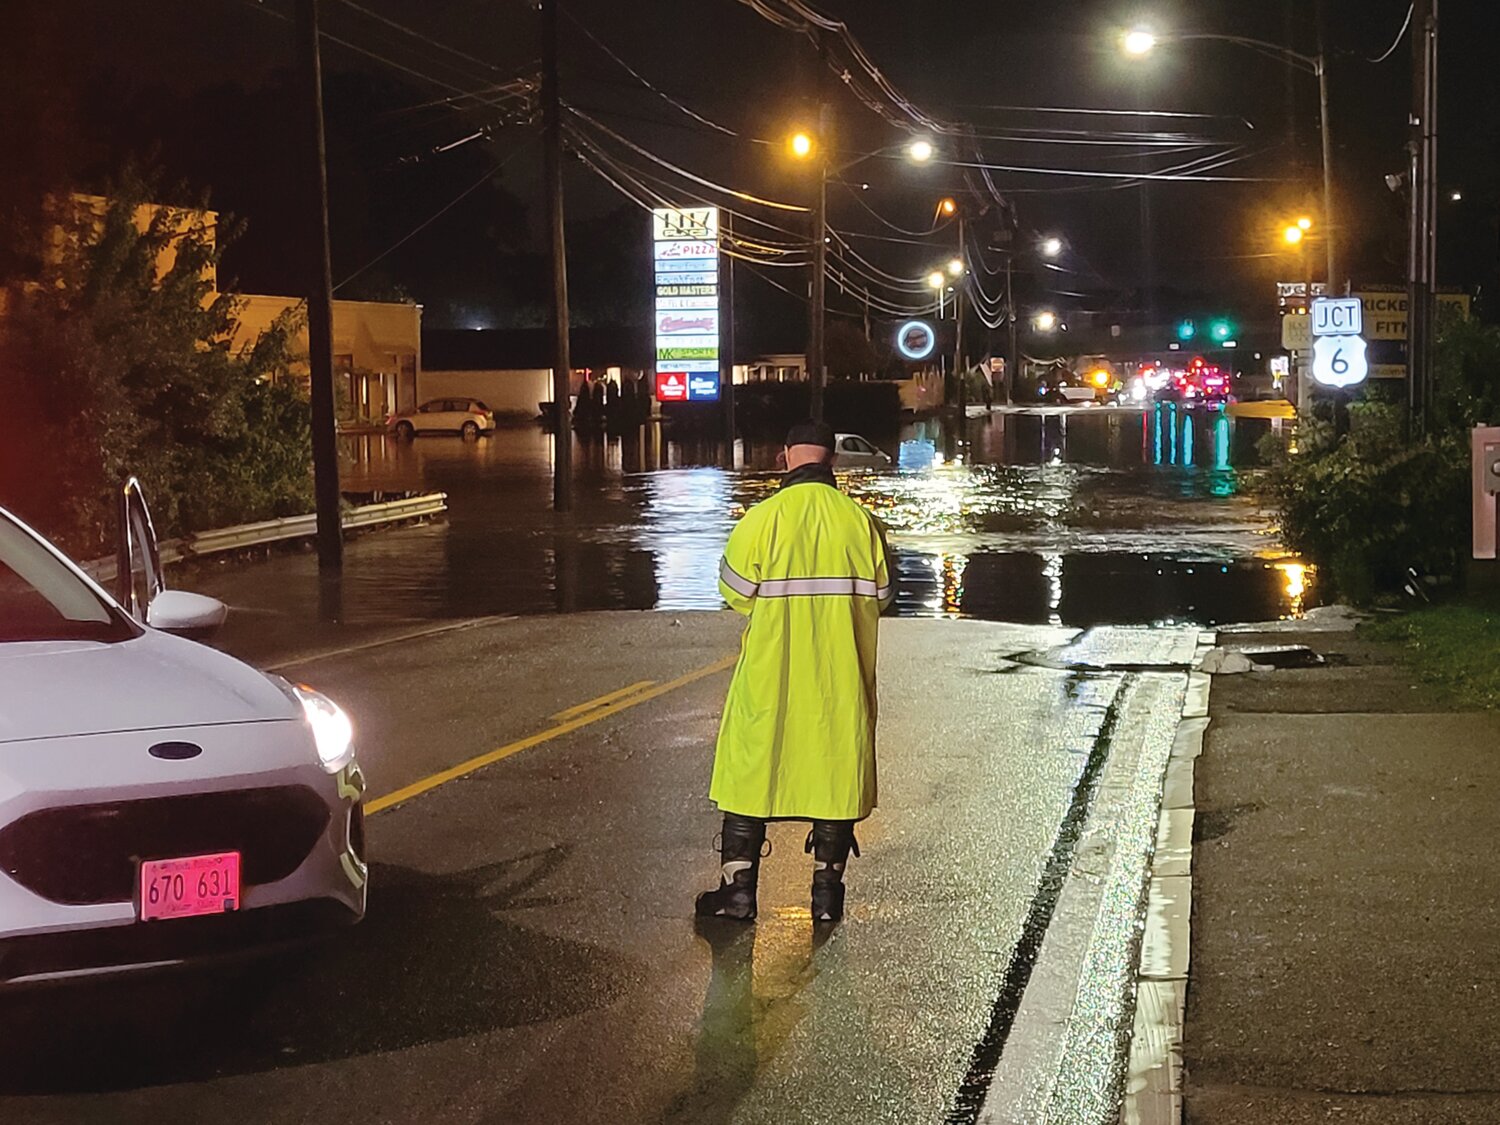 SOAKED SENTINEL: Later Monday night, the stranded vehicle continued to float around the roadway as the waters rose but eventually receded. Standing guard, Mike Edwards of the JPD BCI, kept motorists from driving through the water.